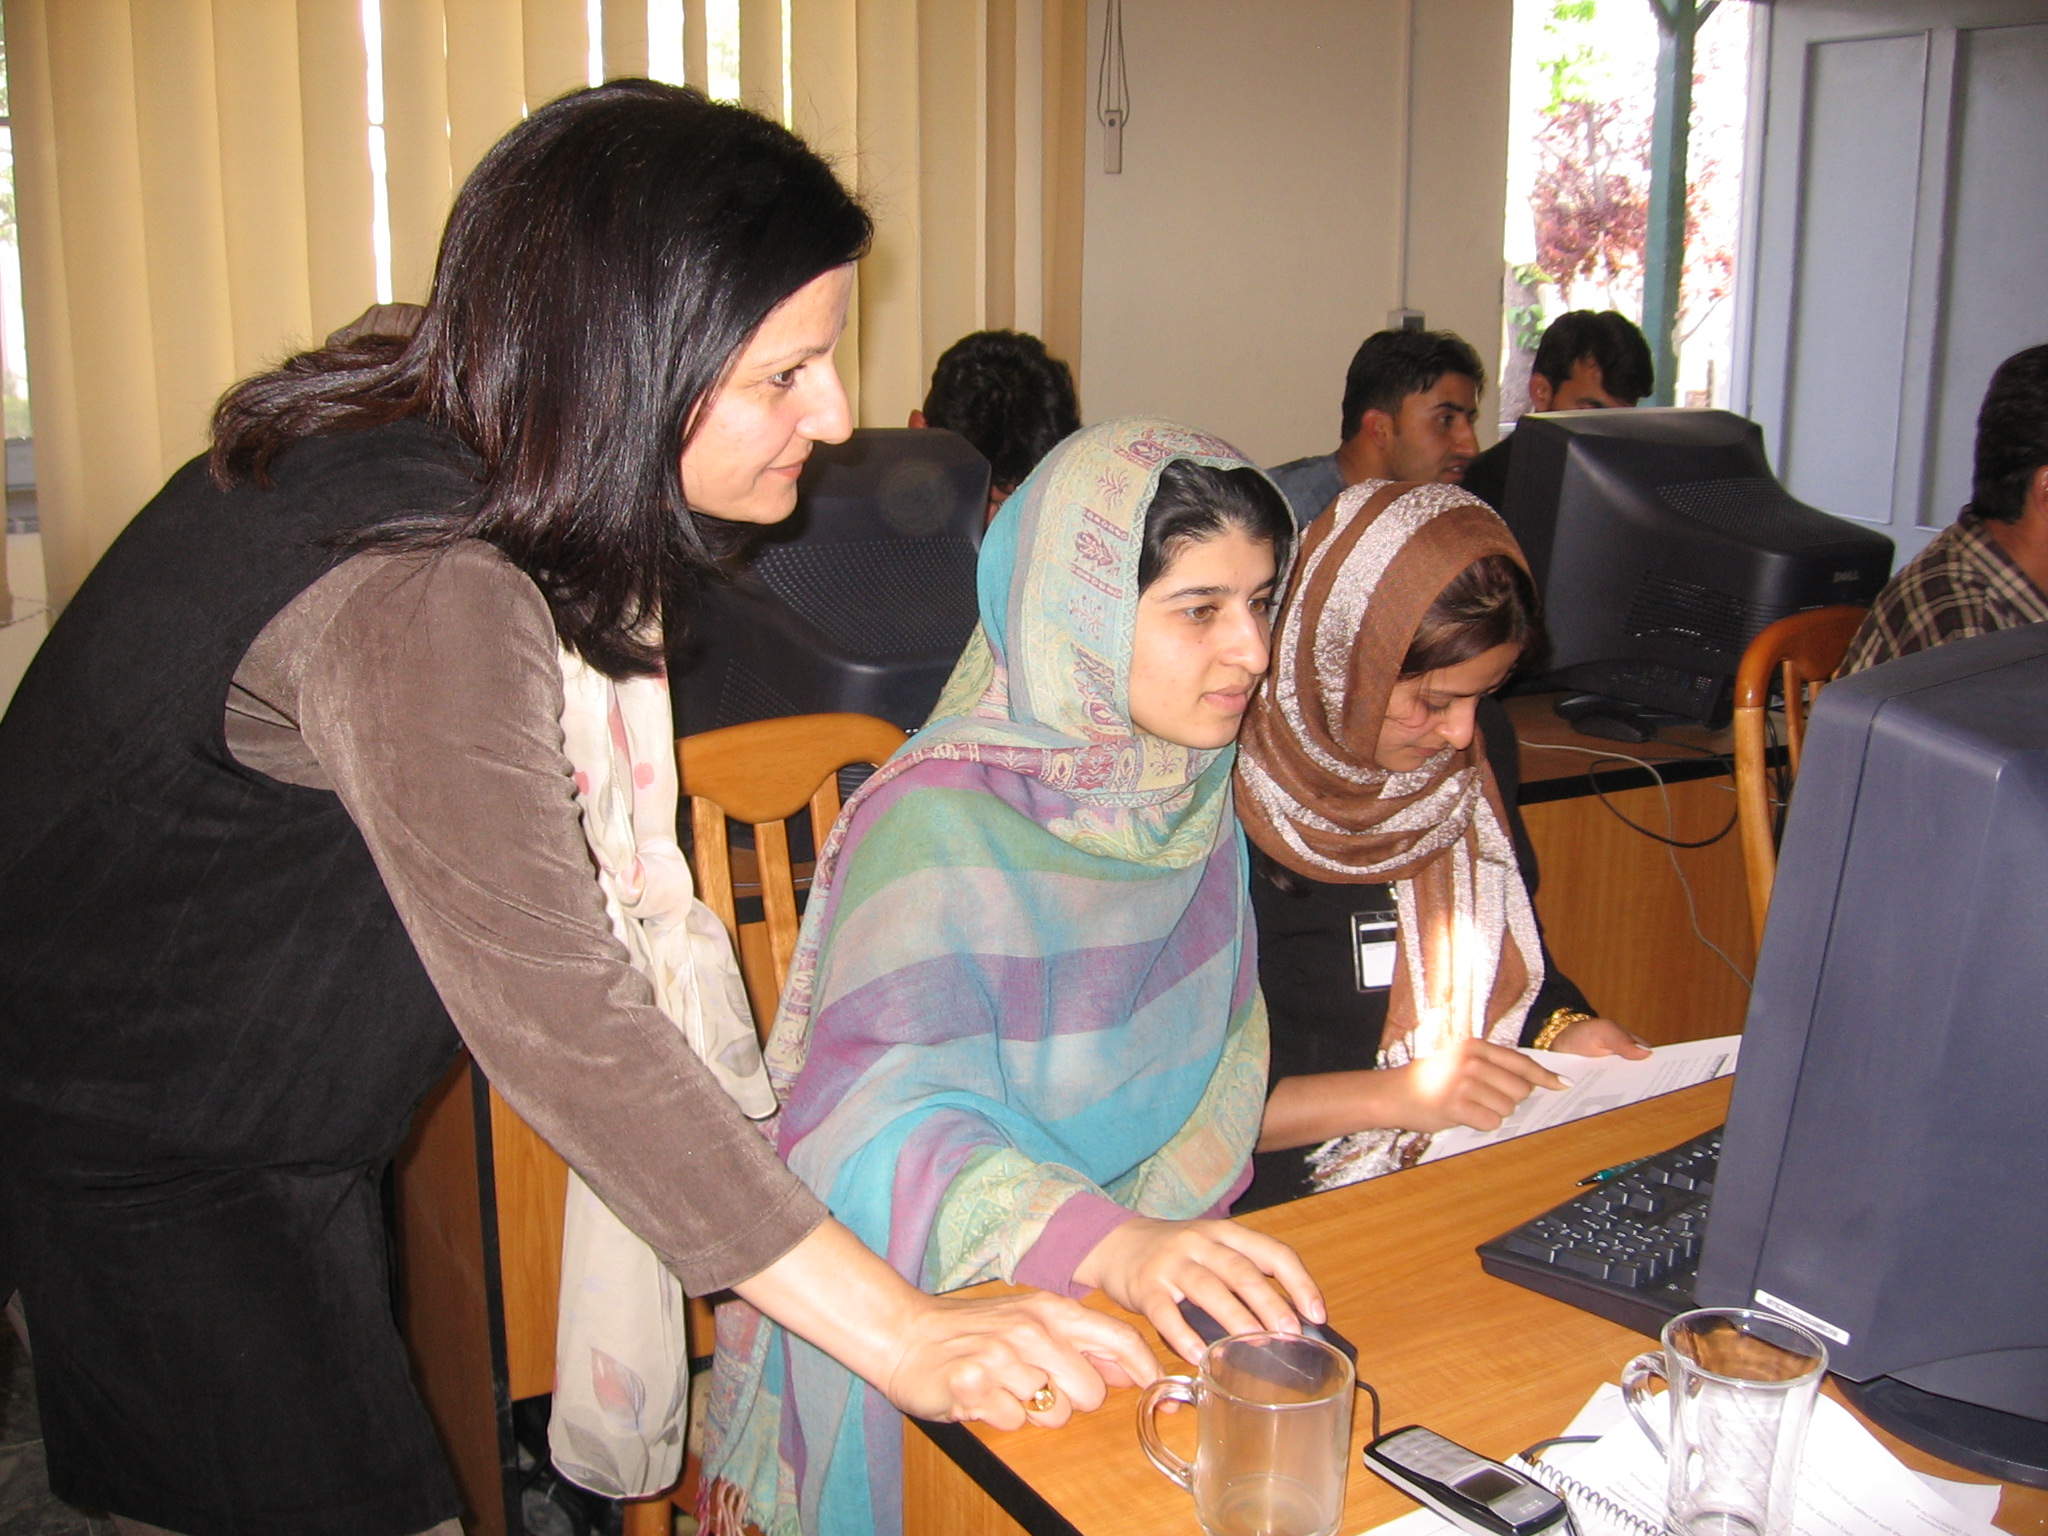 AIMS Staff At A Hands-on Workshop In Afghanistan